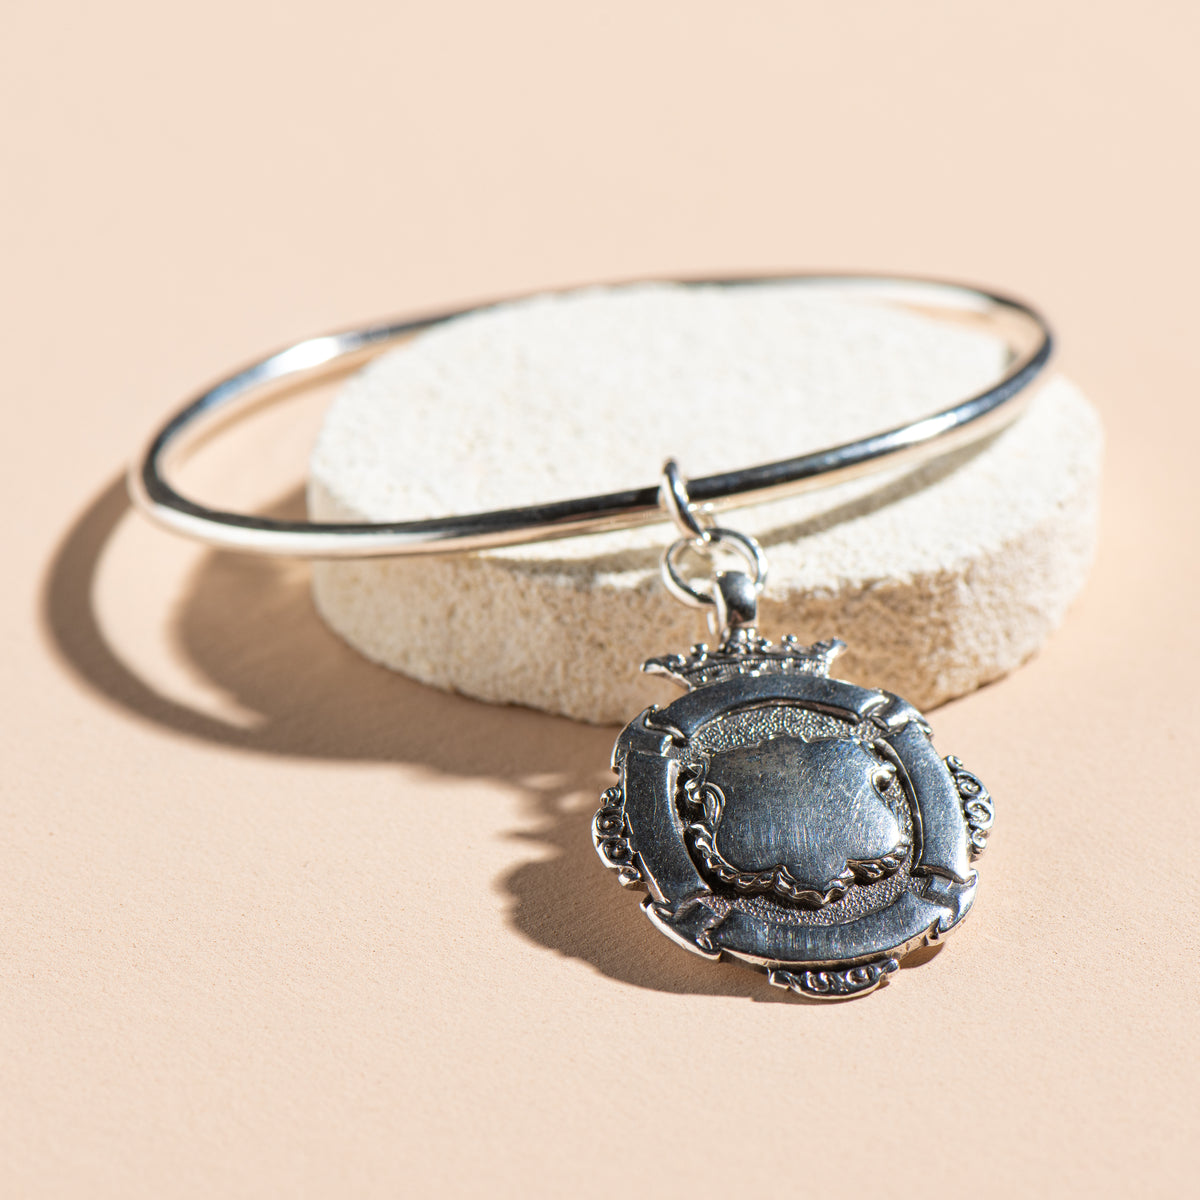 Rounded Oval Bangle with 1923 Vintage Fob Medal Shield